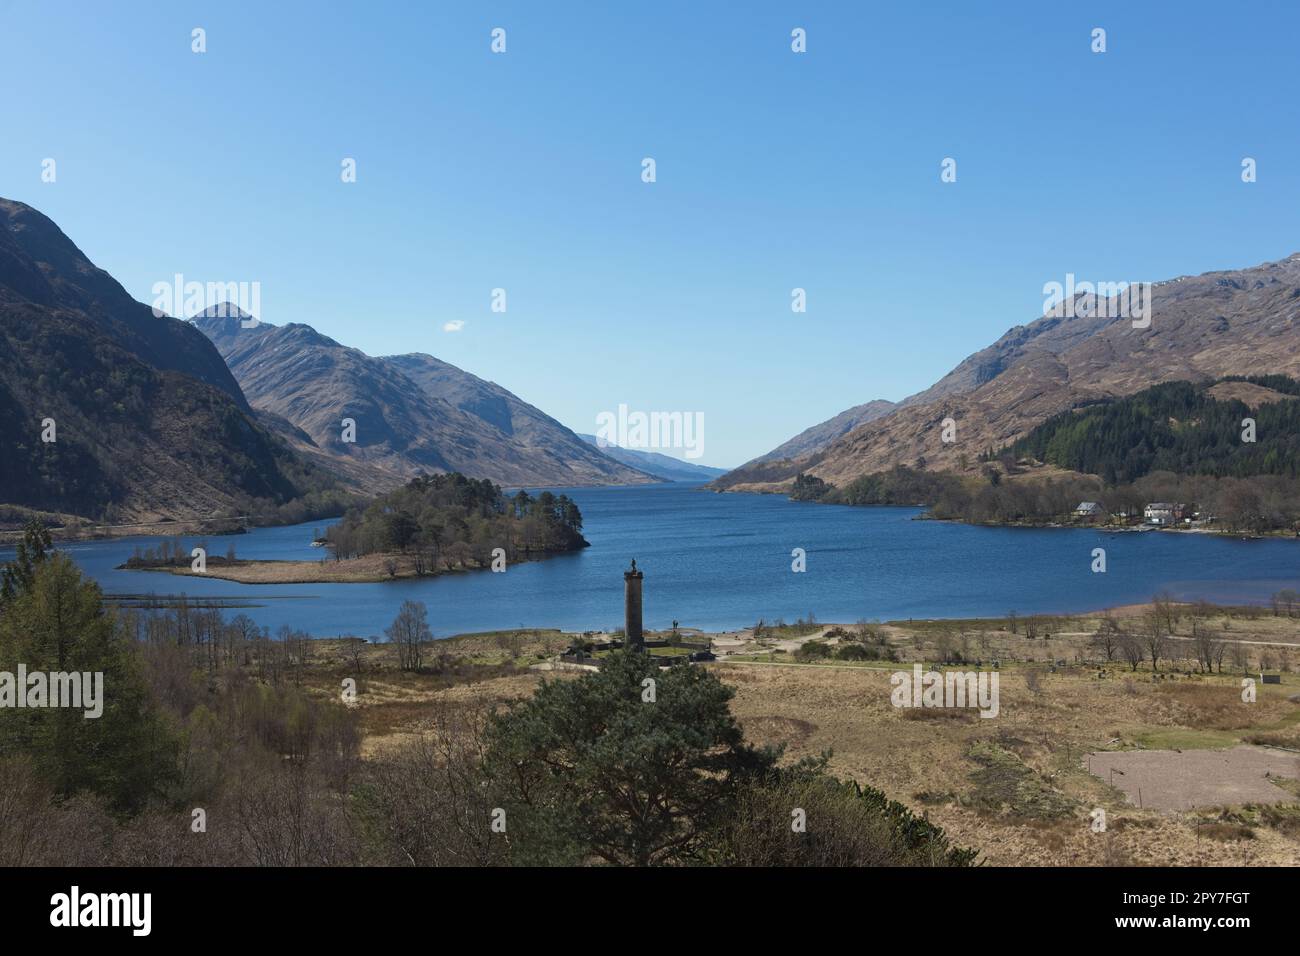 Glenfinnan Monument remembering those who died for the Jacobite cause, overlooking Loch Shiel. The monument is topped with a statue of a Highlander Stock Photo